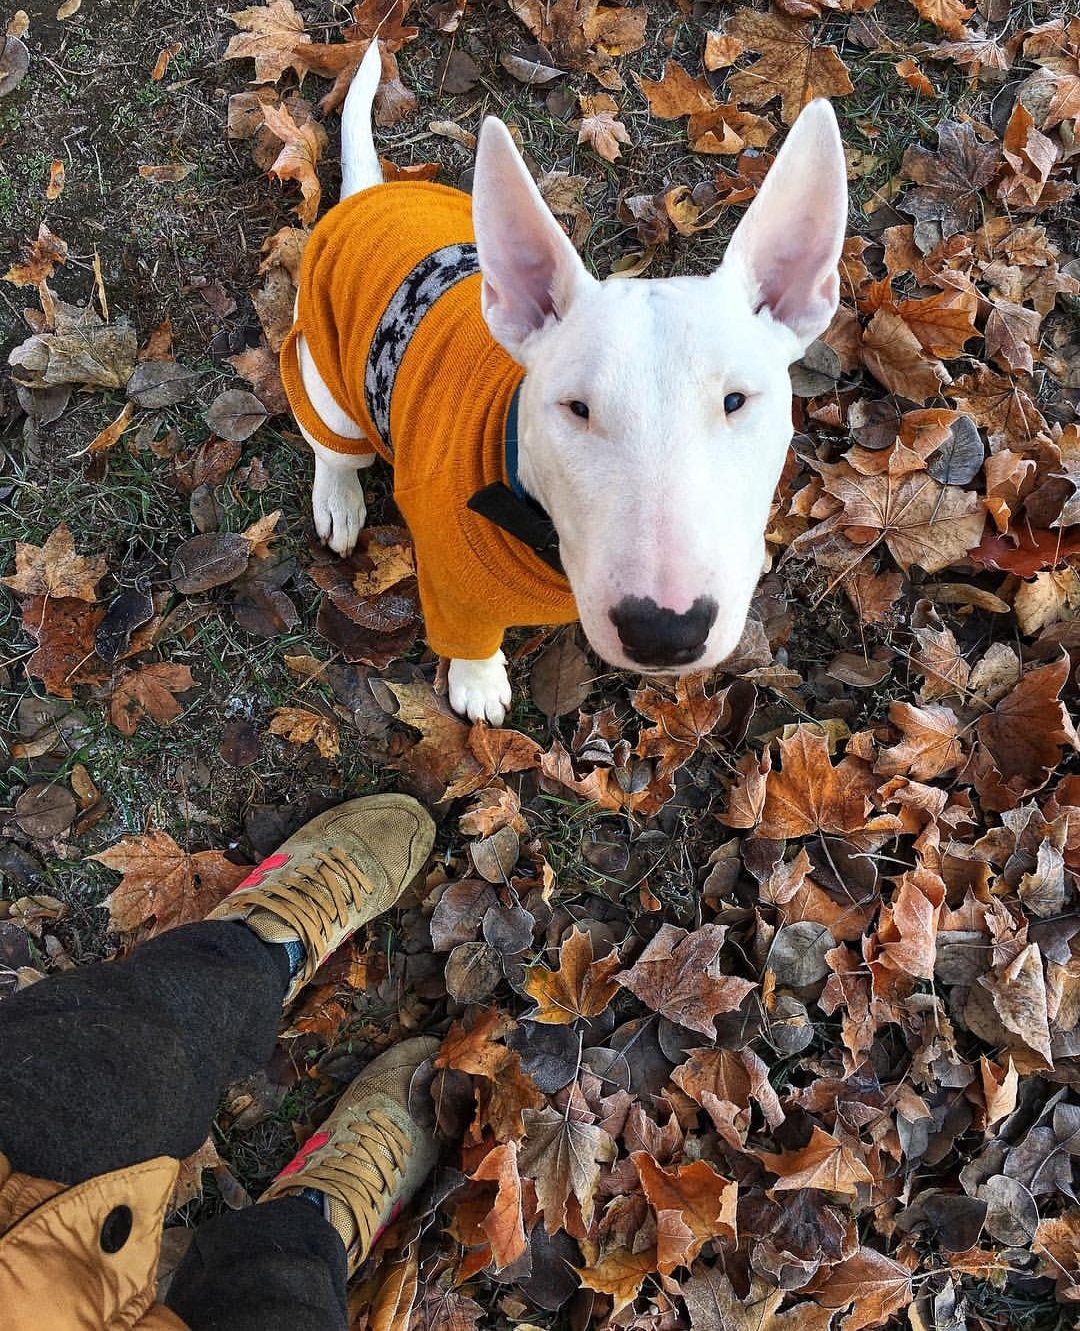 English Bull Terrier wearing a mustard sweater taking a walk in the green grass with dried leaves